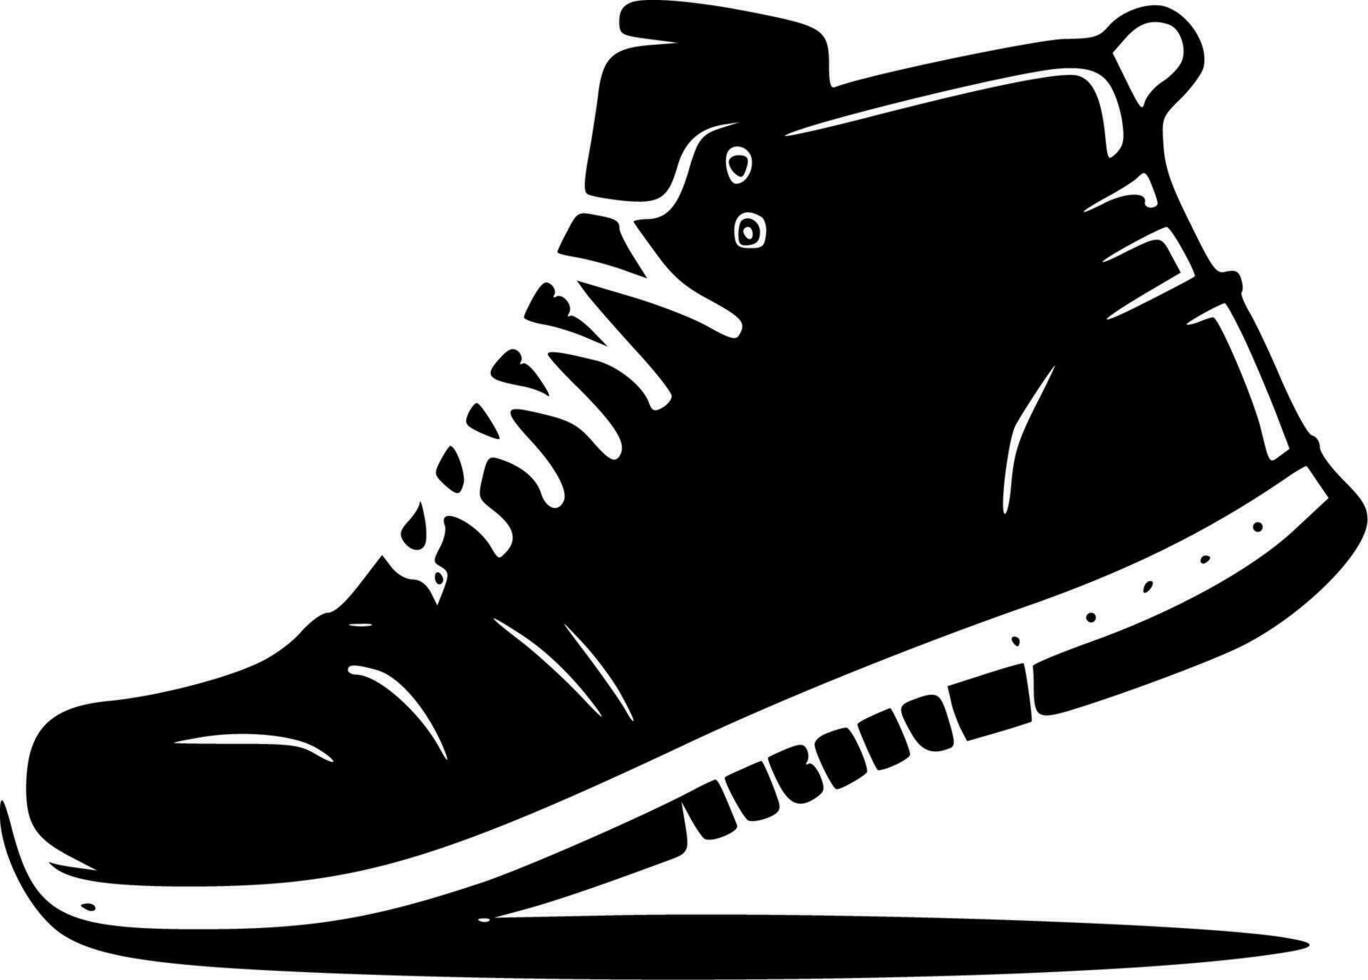 Shoes - High Quality Vector Logo - Vector illustration ideal for T-shirt graphic